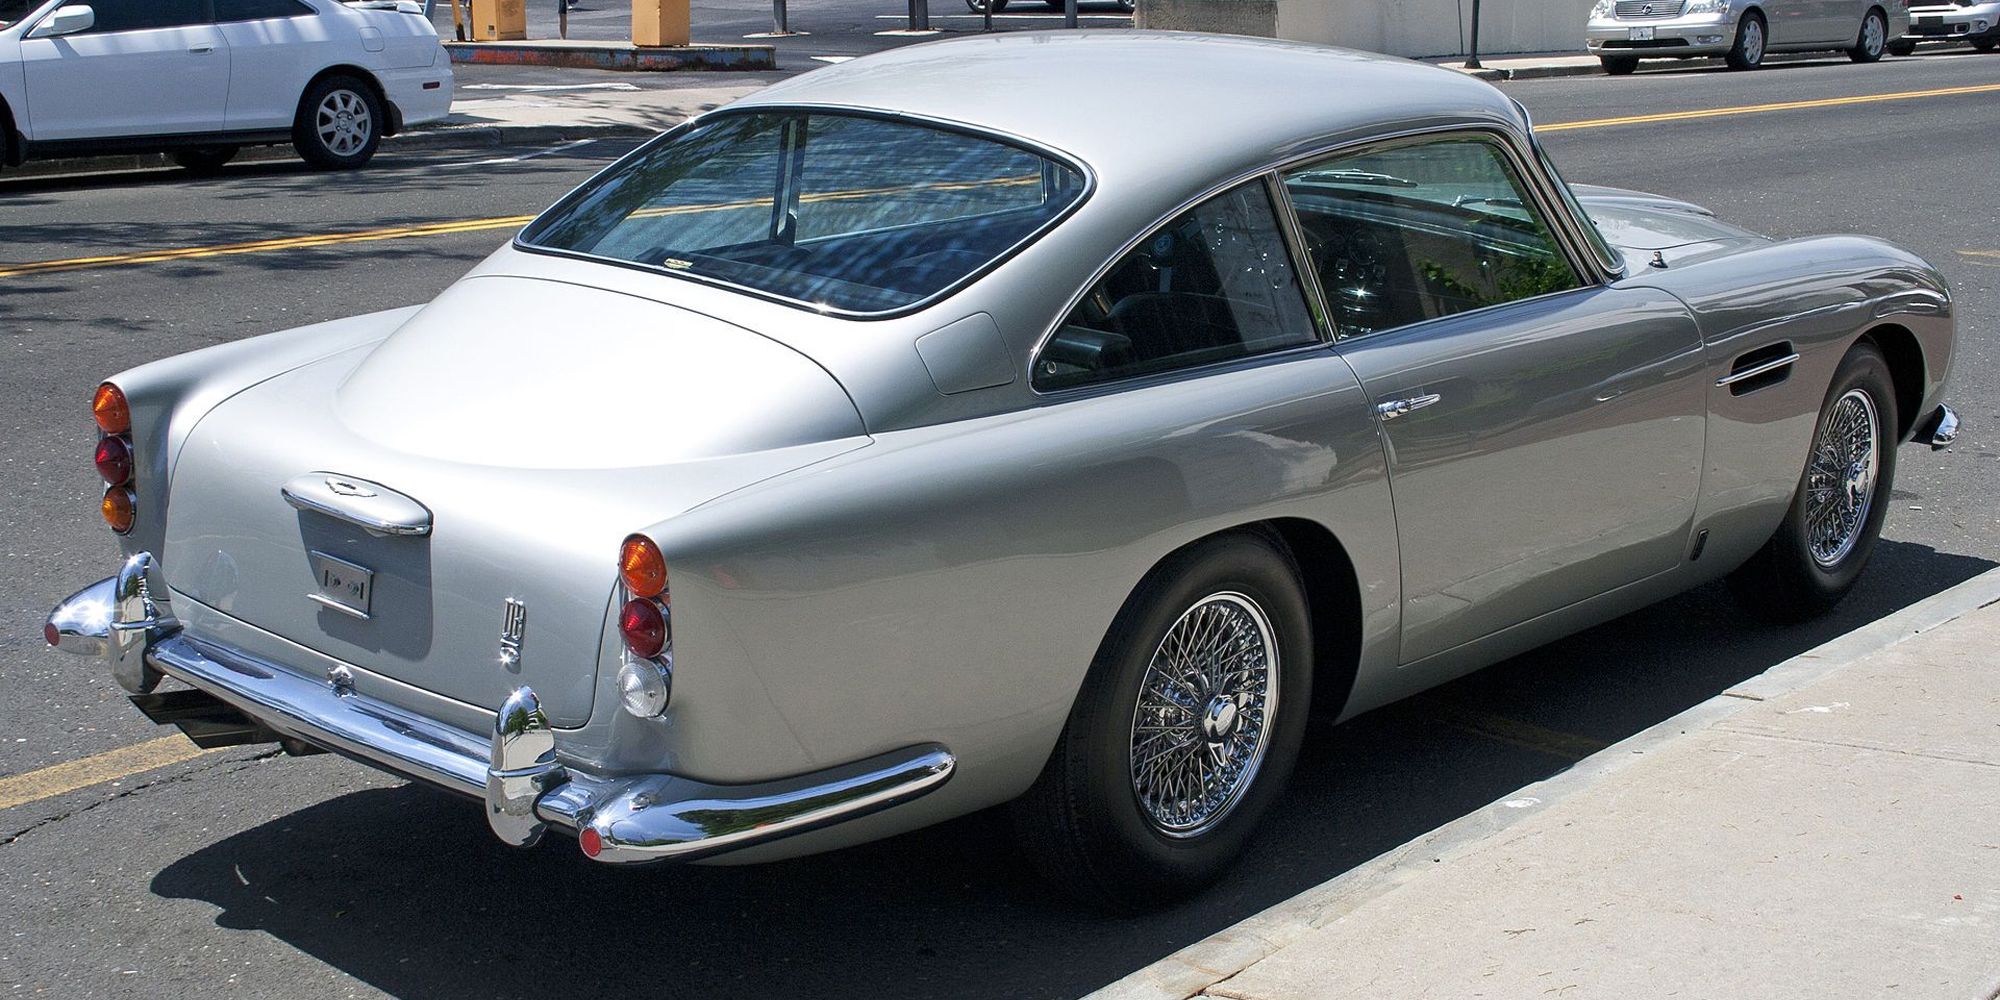 Rear 3/4 view of the DB5